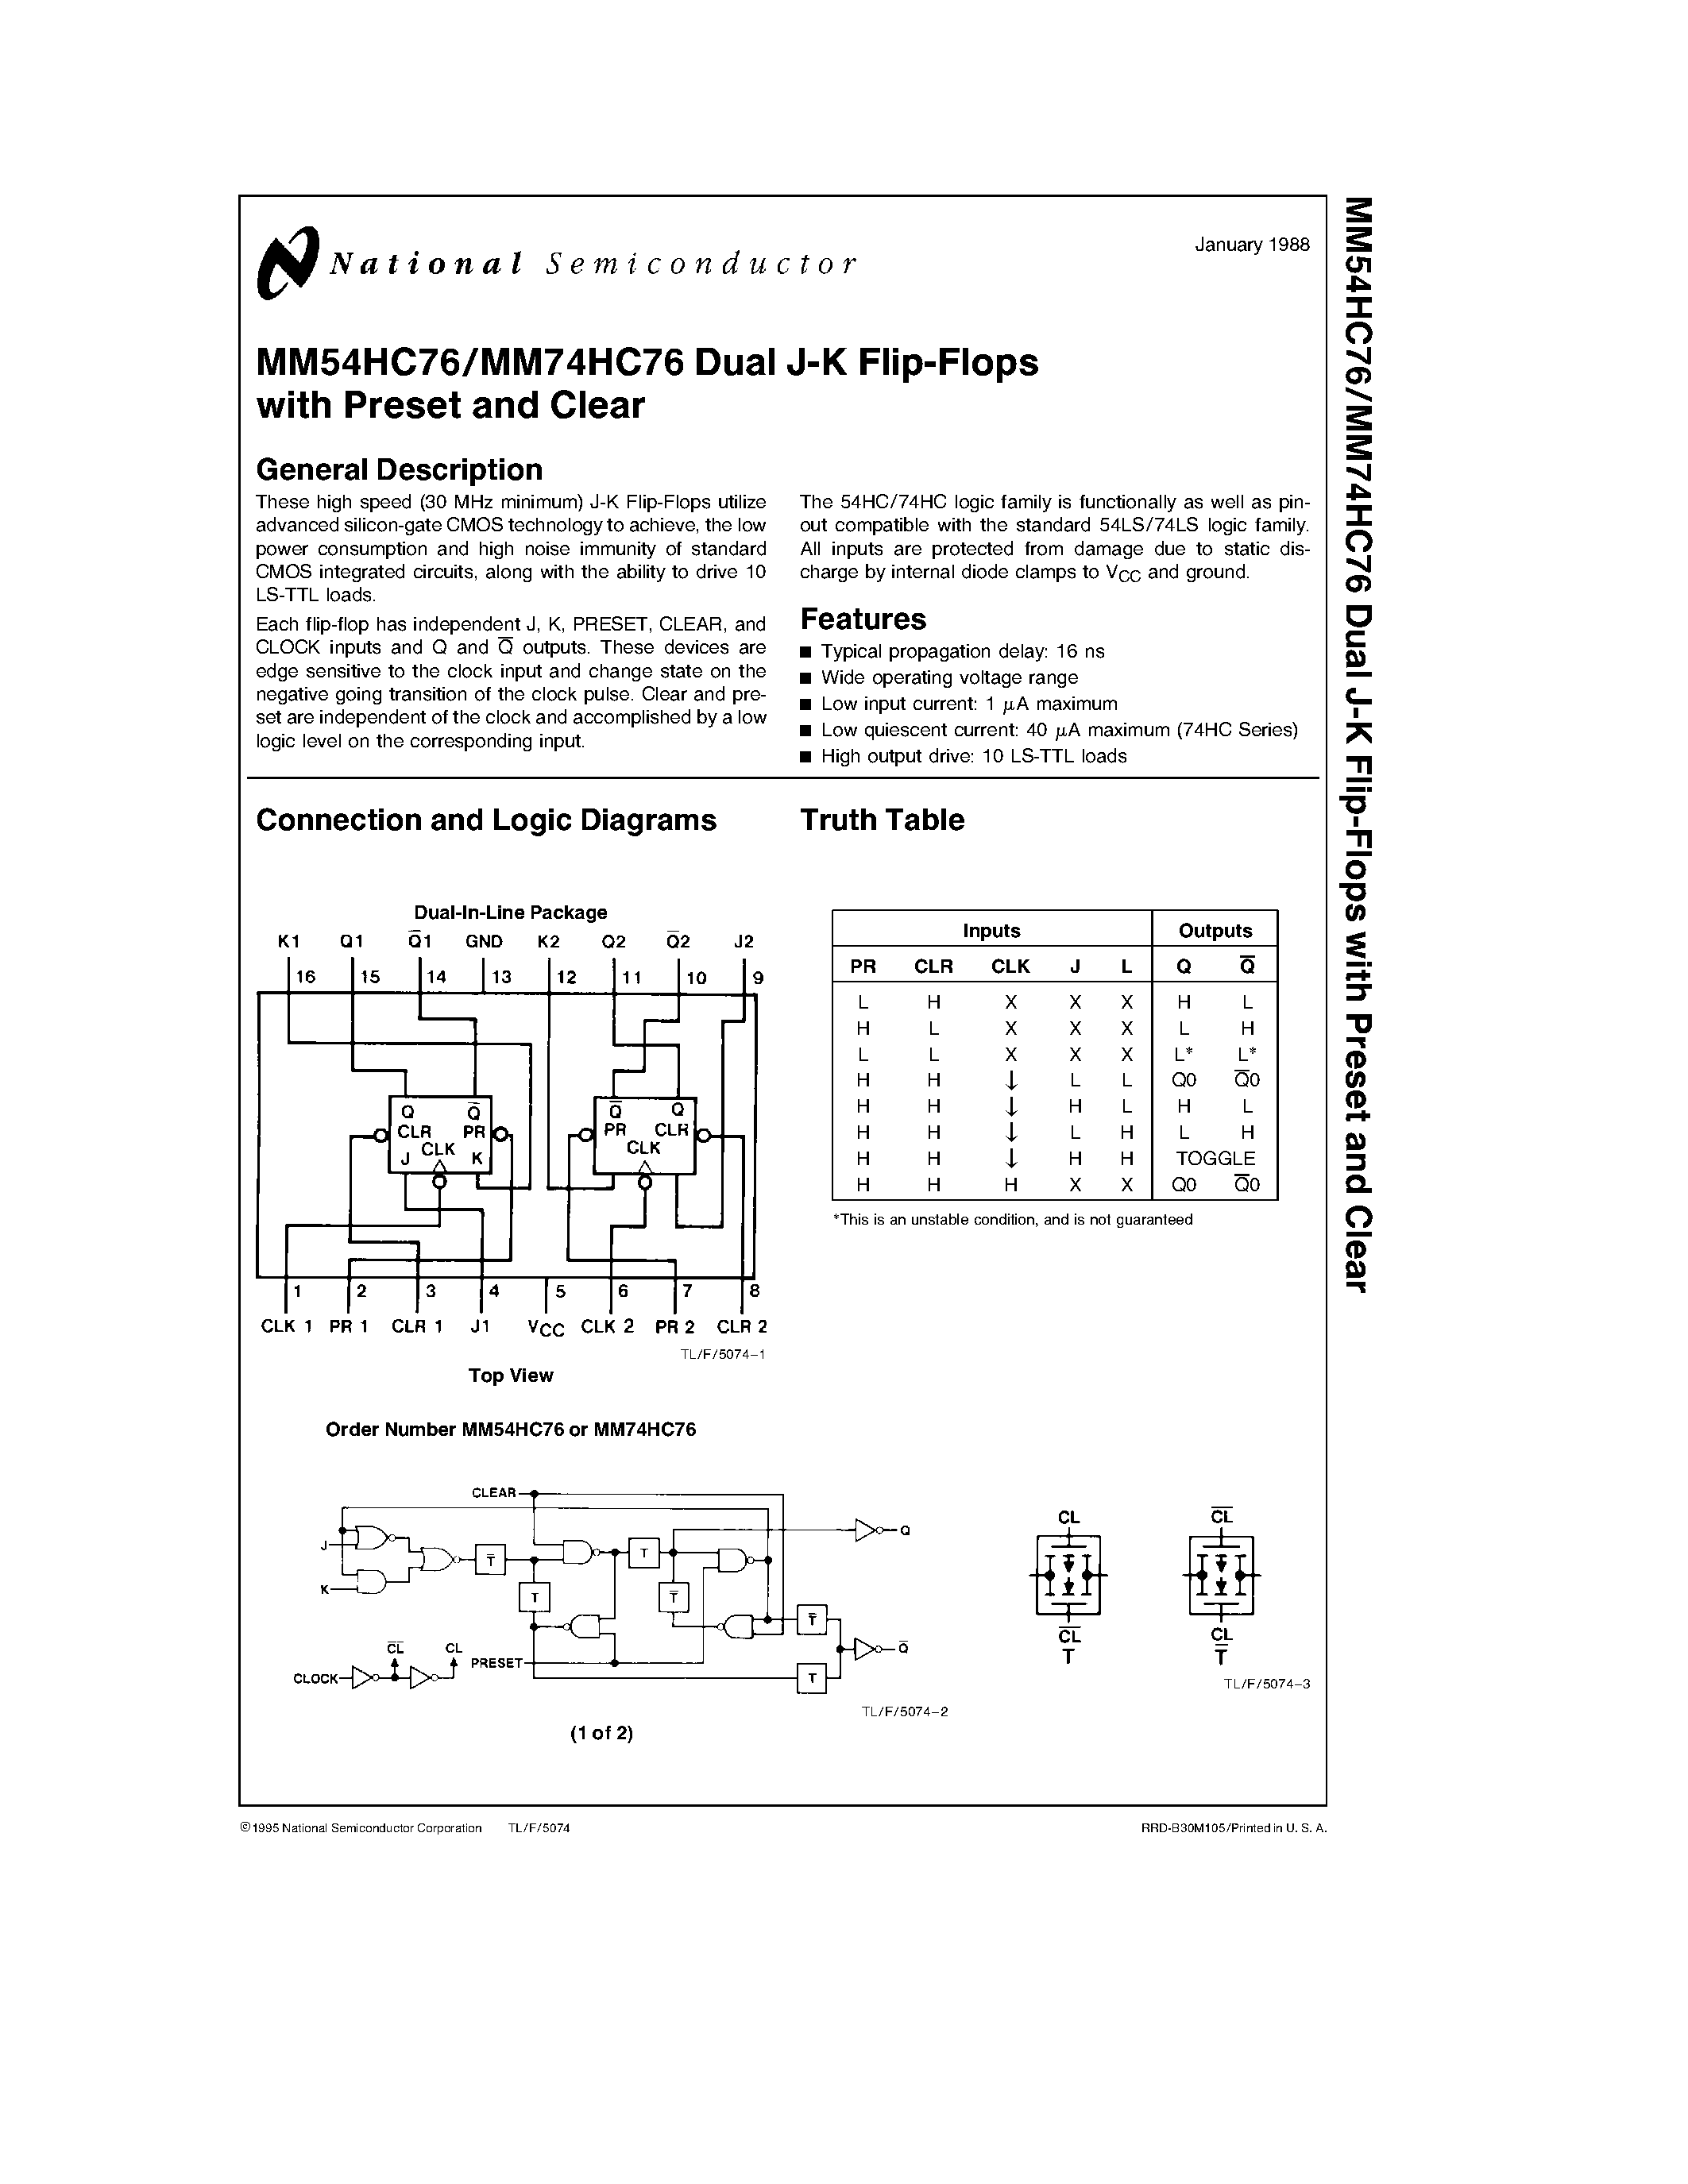 Datasheet MM74HC76J - Dual J-K Flip-Flops with Preset and Clear page 1